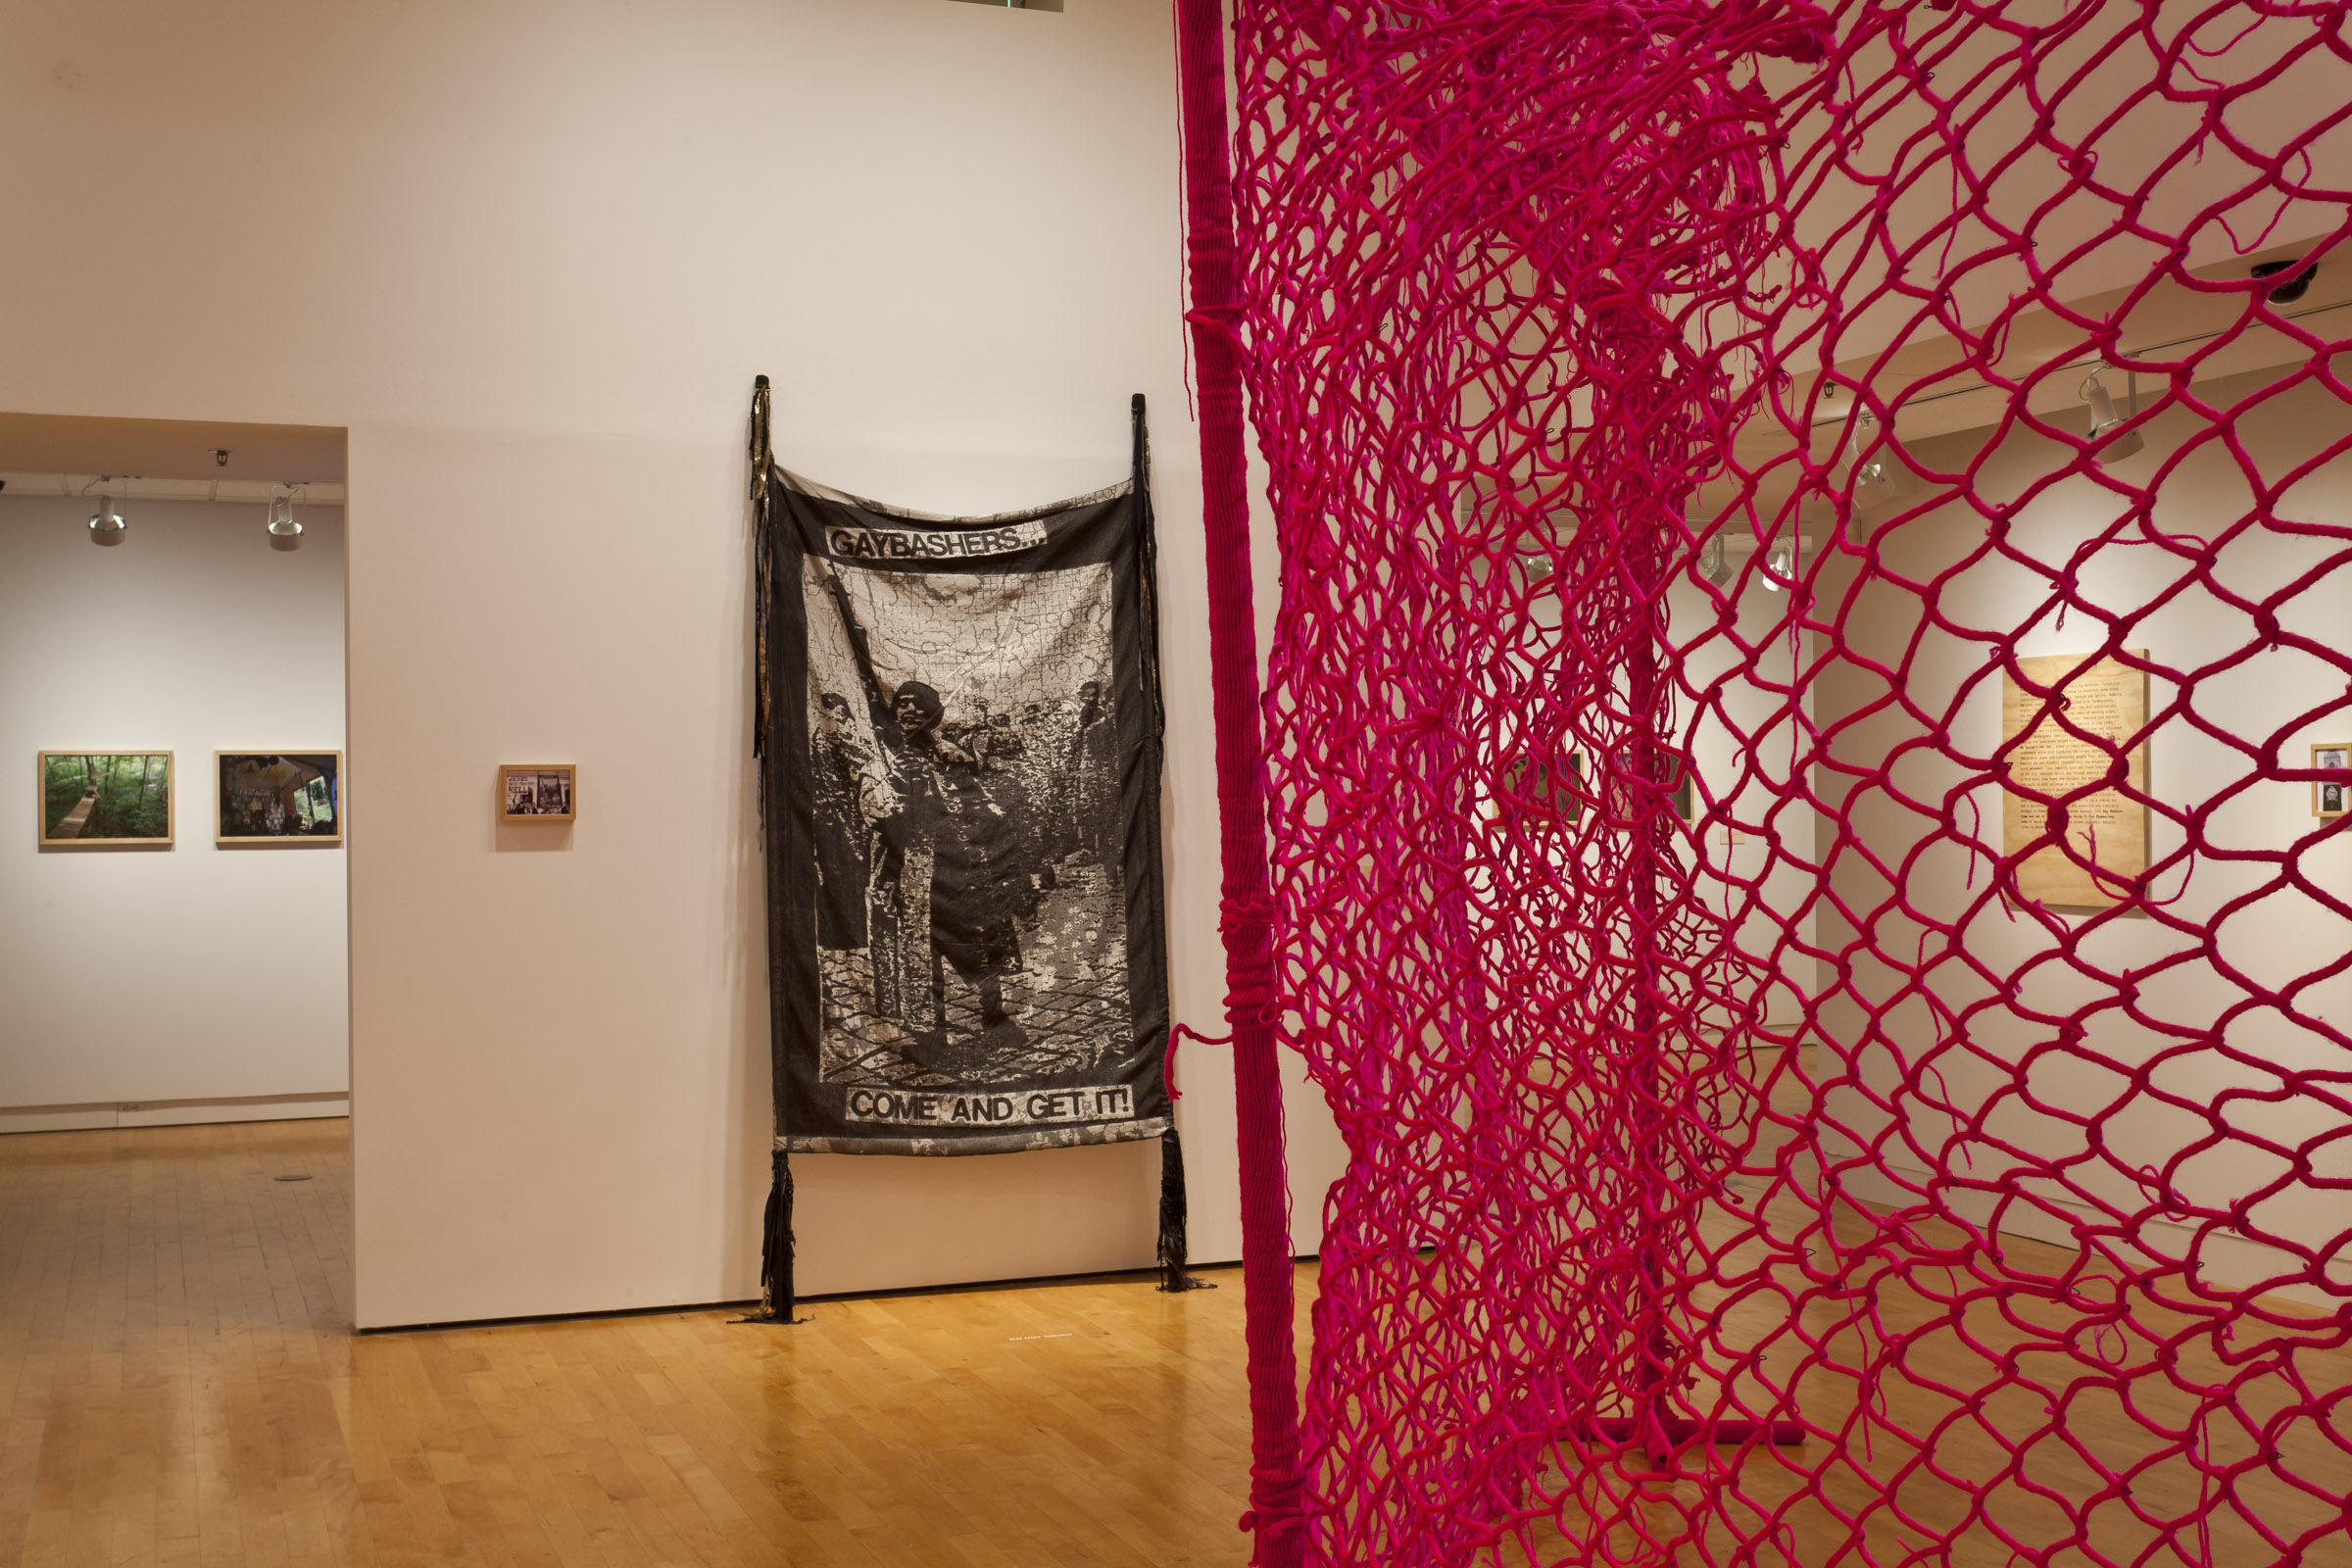 Installation shot: Foreground: We Couldn’t Get In. We Couldn’t Get Out. (2006-2007); Crank-knit yarn, hand-woven wire, steel poles. Midground: Gay Bashers Come And Get It (2011); Jacquard-woven cotton and lurex, hand-dyed fabric, crank-knit yarn, thread. Graphic appropriated from a poster designed by Matt Height, silkscreened at Queeruption (1999) at DUMBA, Brooklyn, and used as an album insert for queercore band Limp Wrist. Both by L.J. Roberts and courtesy of the artist.